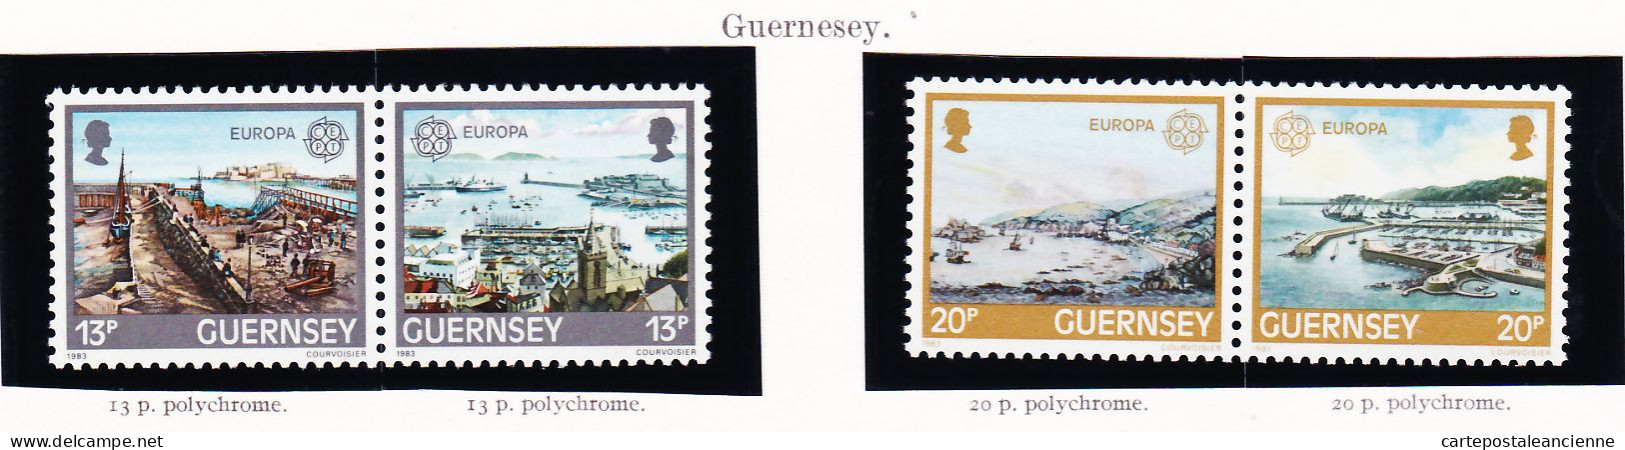 28268 / CEPT EUROPA 1983 GUERNSEY Guernesey 2 Paires Yvert-Tellier N° 267 / 270  MICHEL N° 265 / 268  ** MNH C.E.P.T - 1983